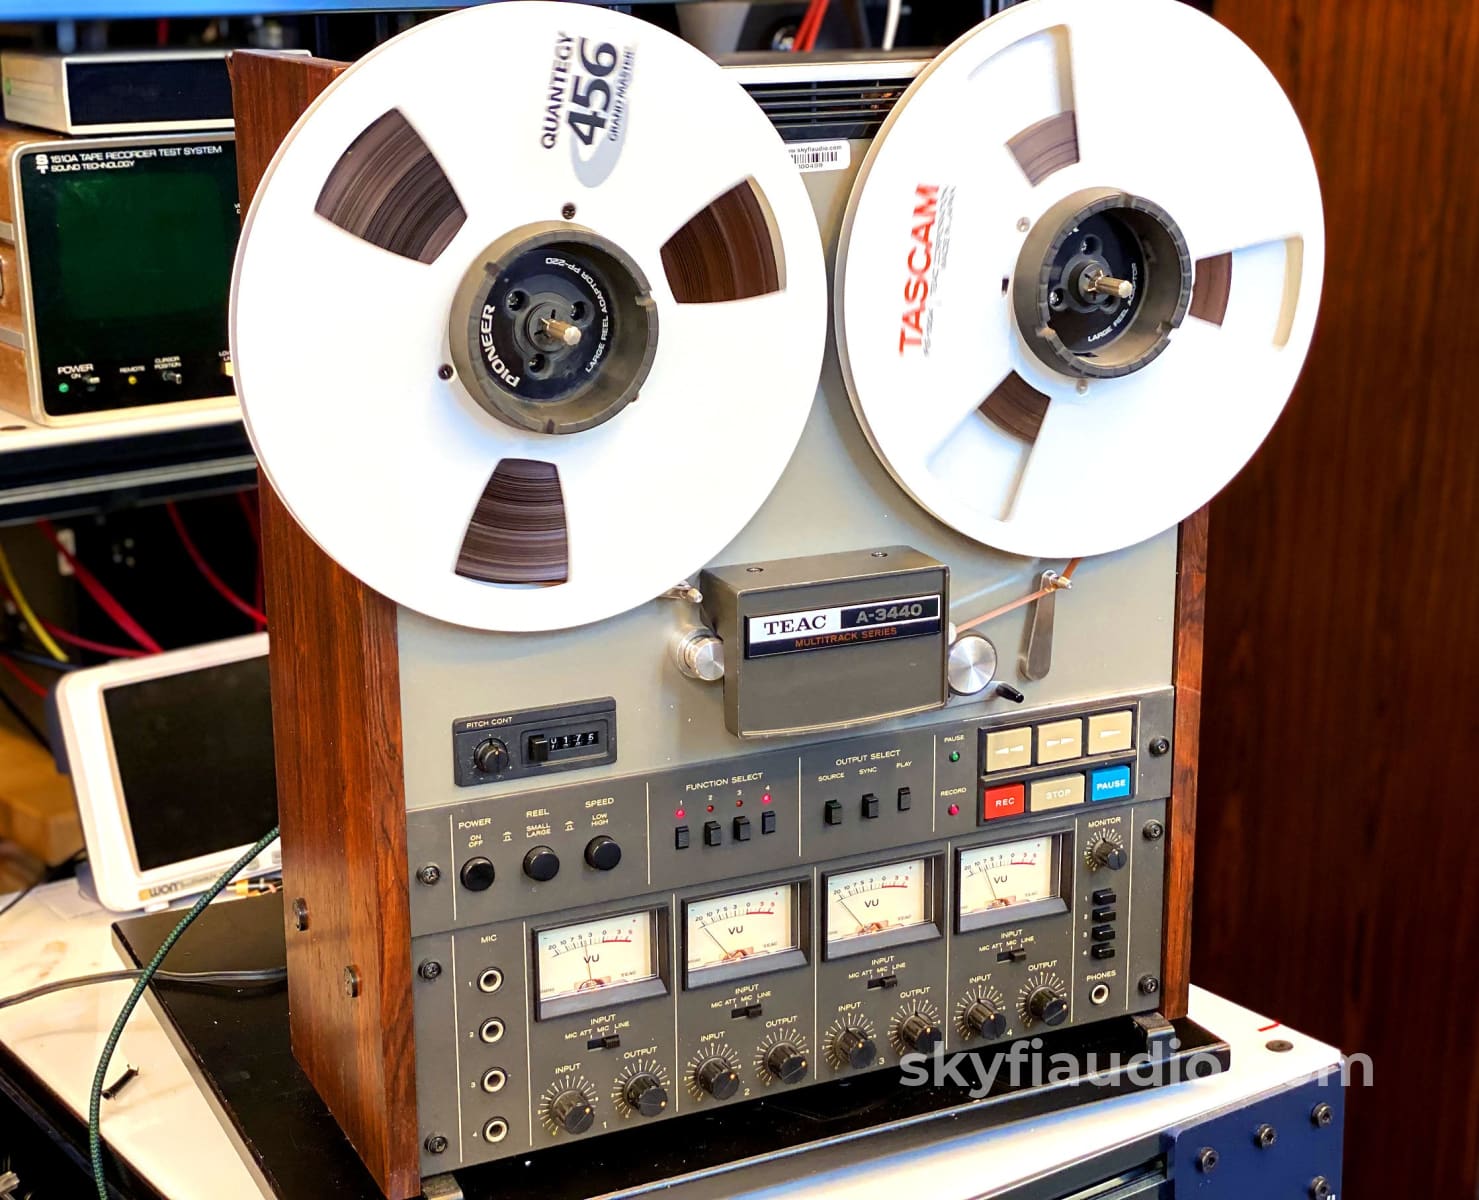 Teac Reel to Reel Deck A-4010A, Audio Components